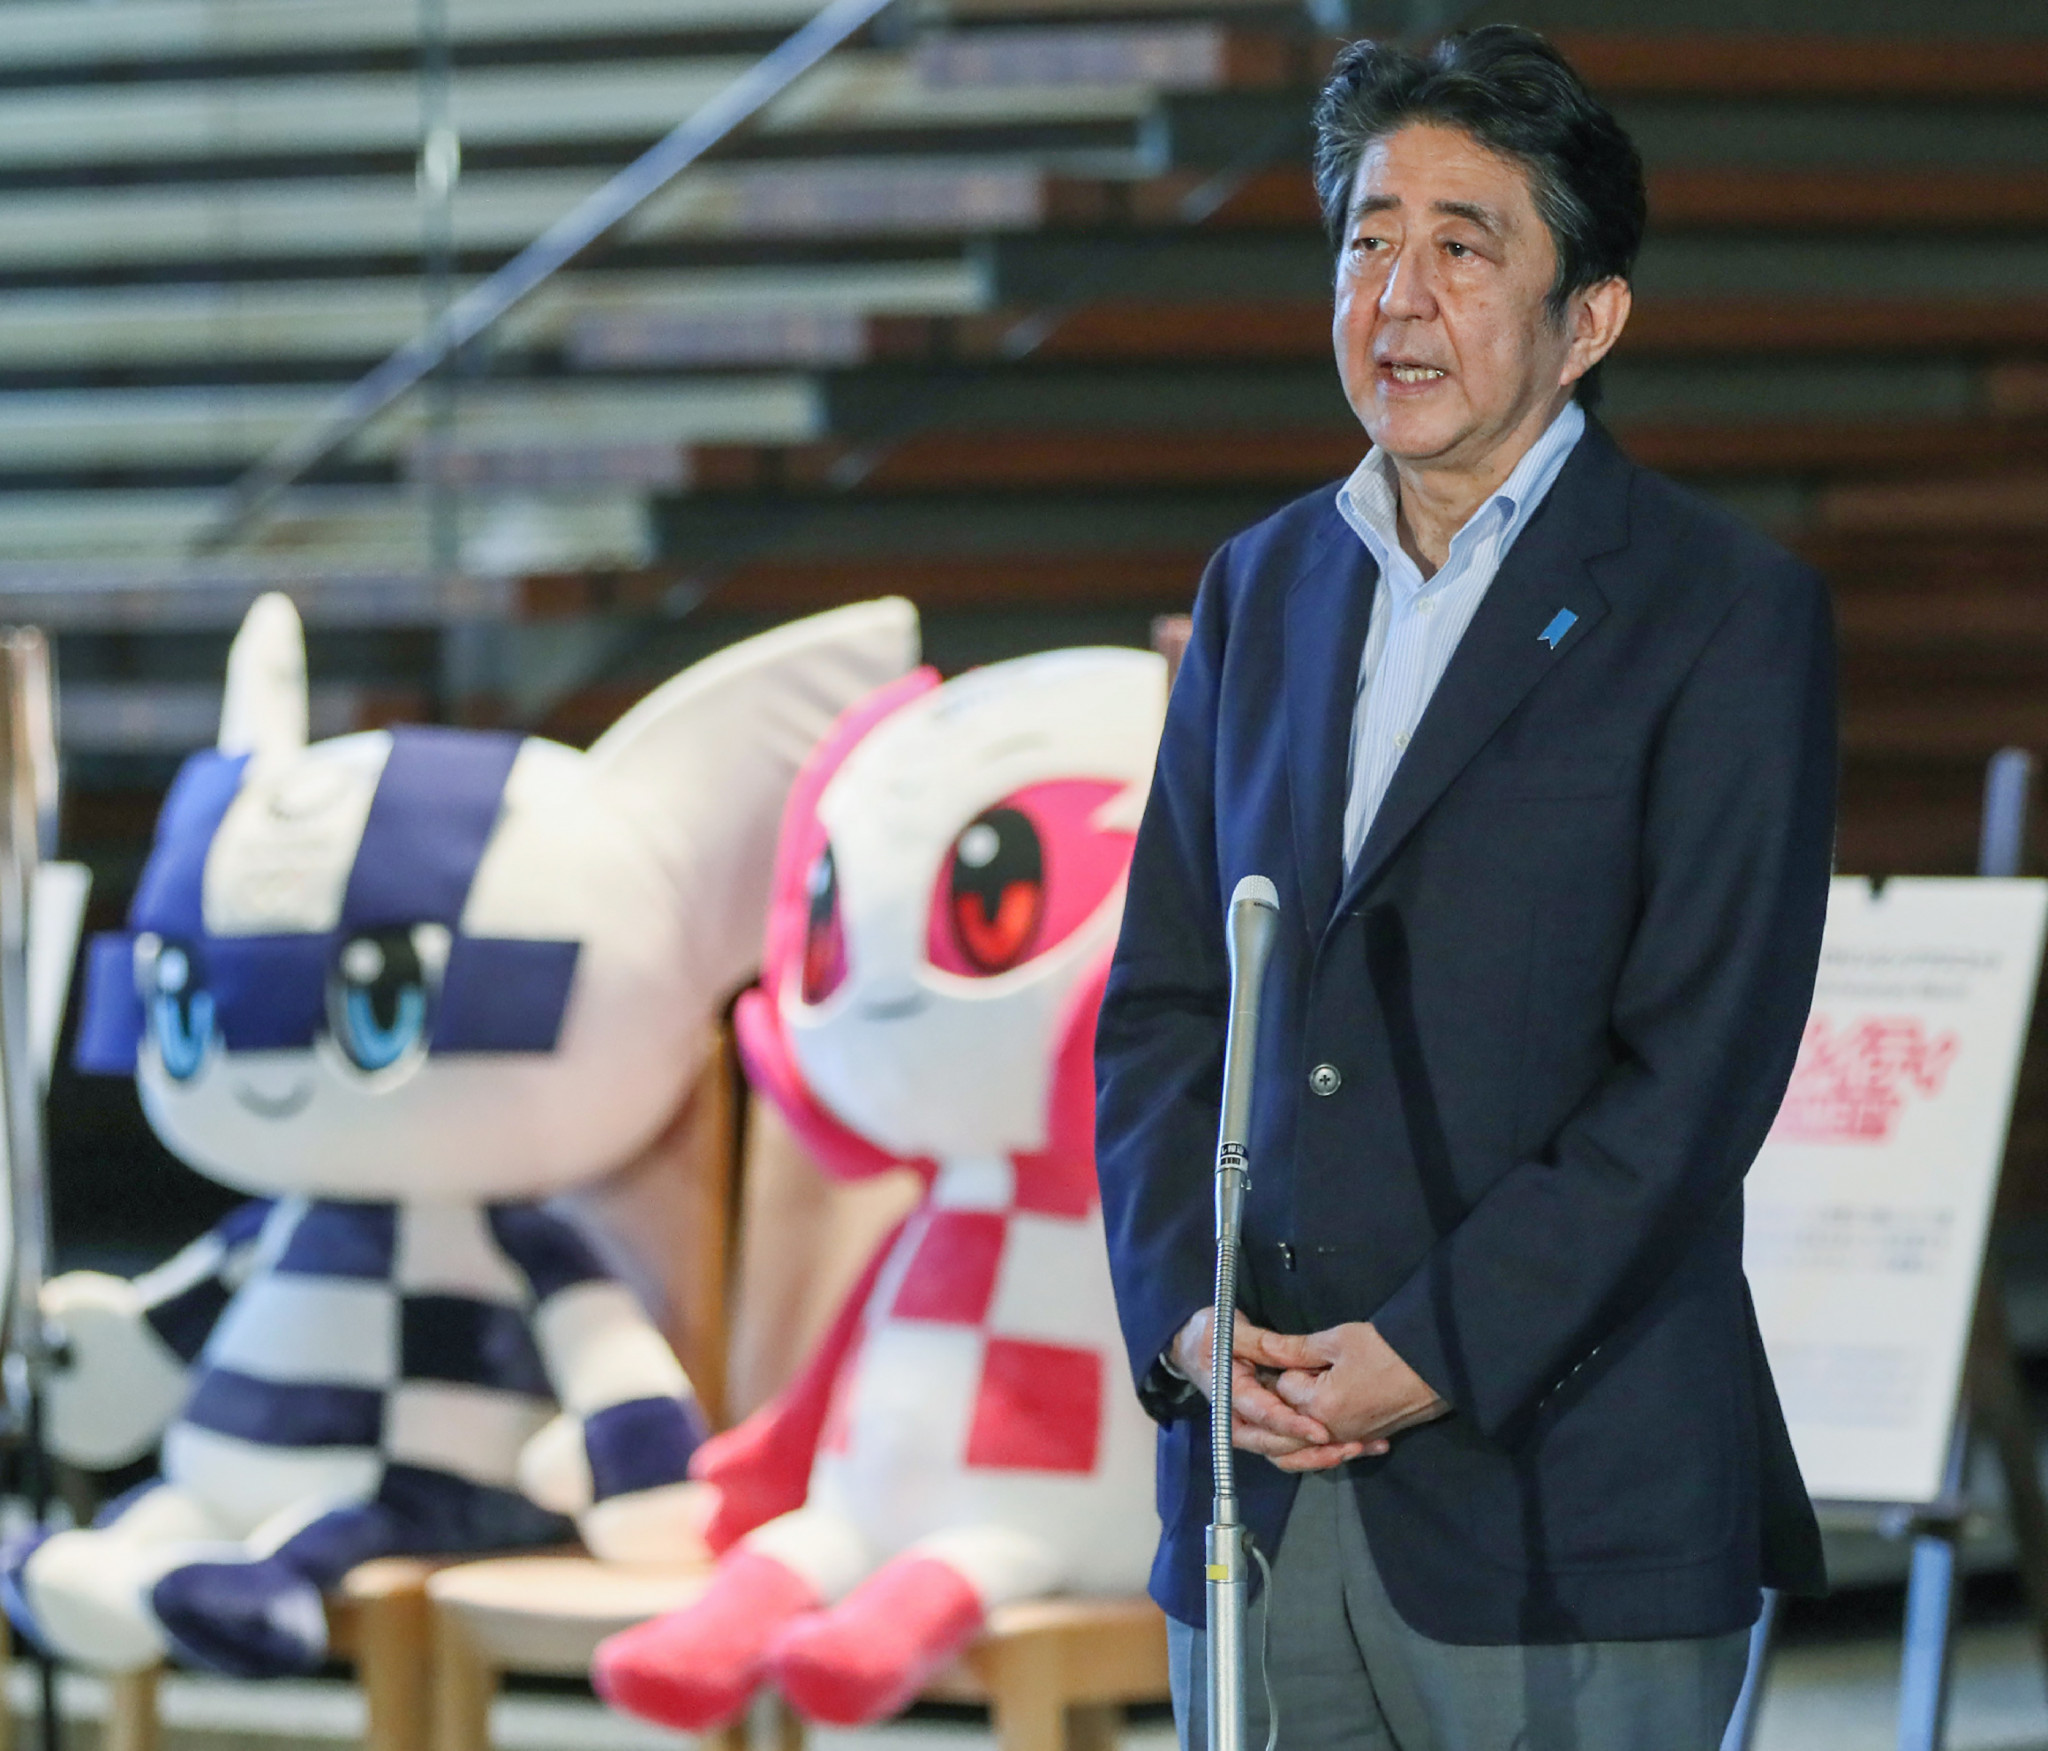 Japanese Prime Minister Shinzō Abe has suggested the Games could show humankind's victory over coronavirus ©Getty Images